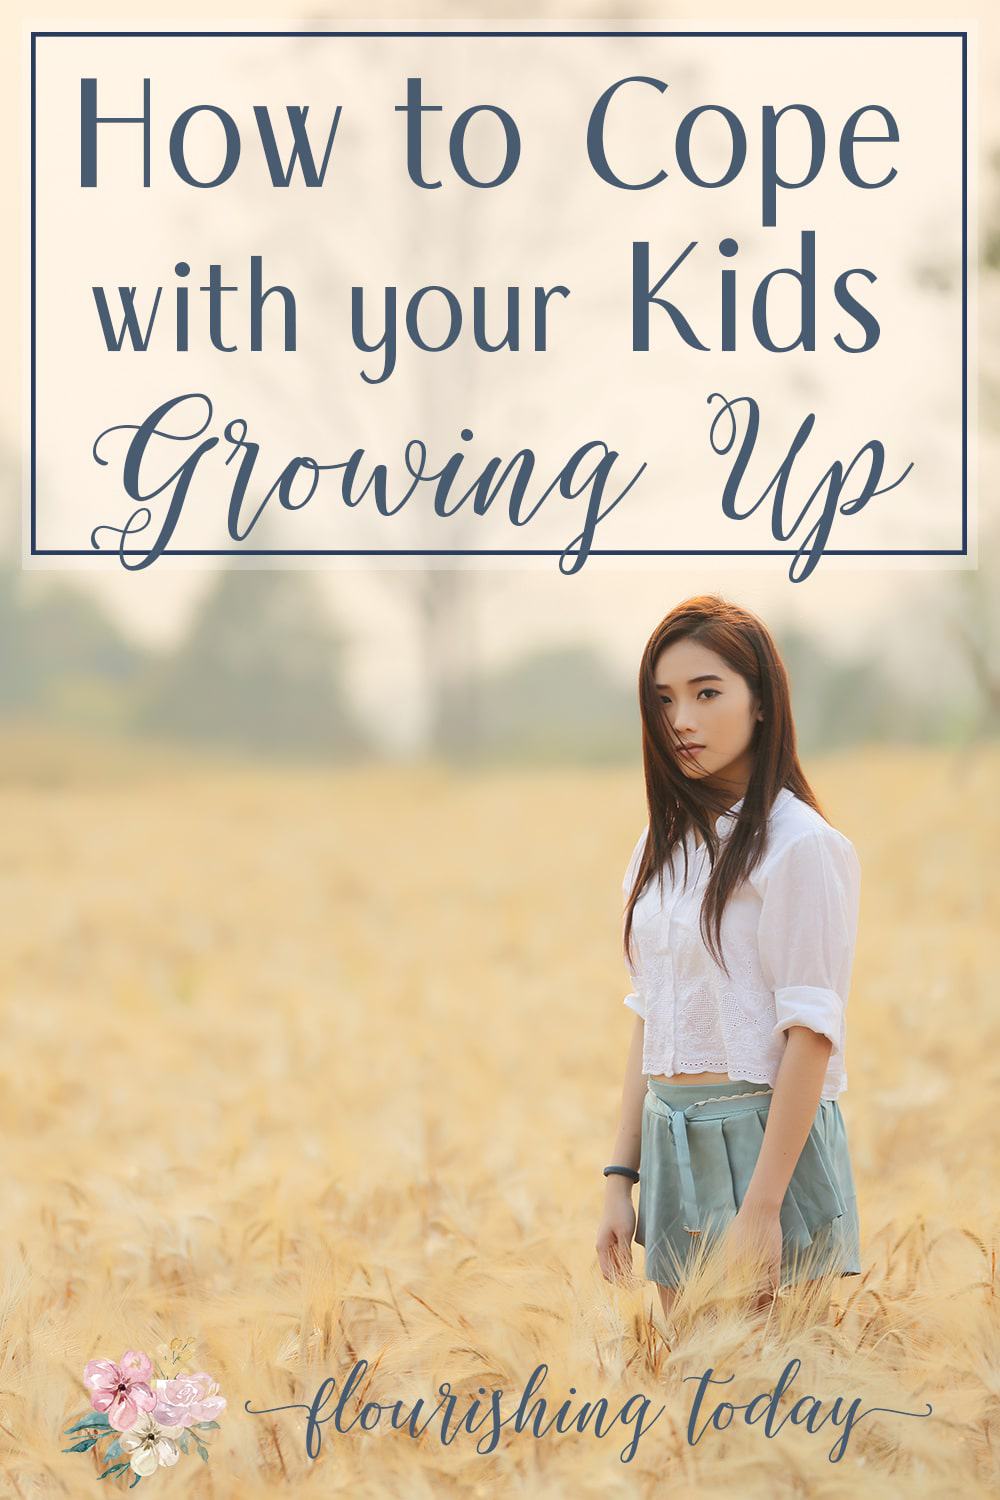 Are you having a hard time with your children growing up? Here's a few tips on how you can not just cope, but be confident and equipped for the next season.